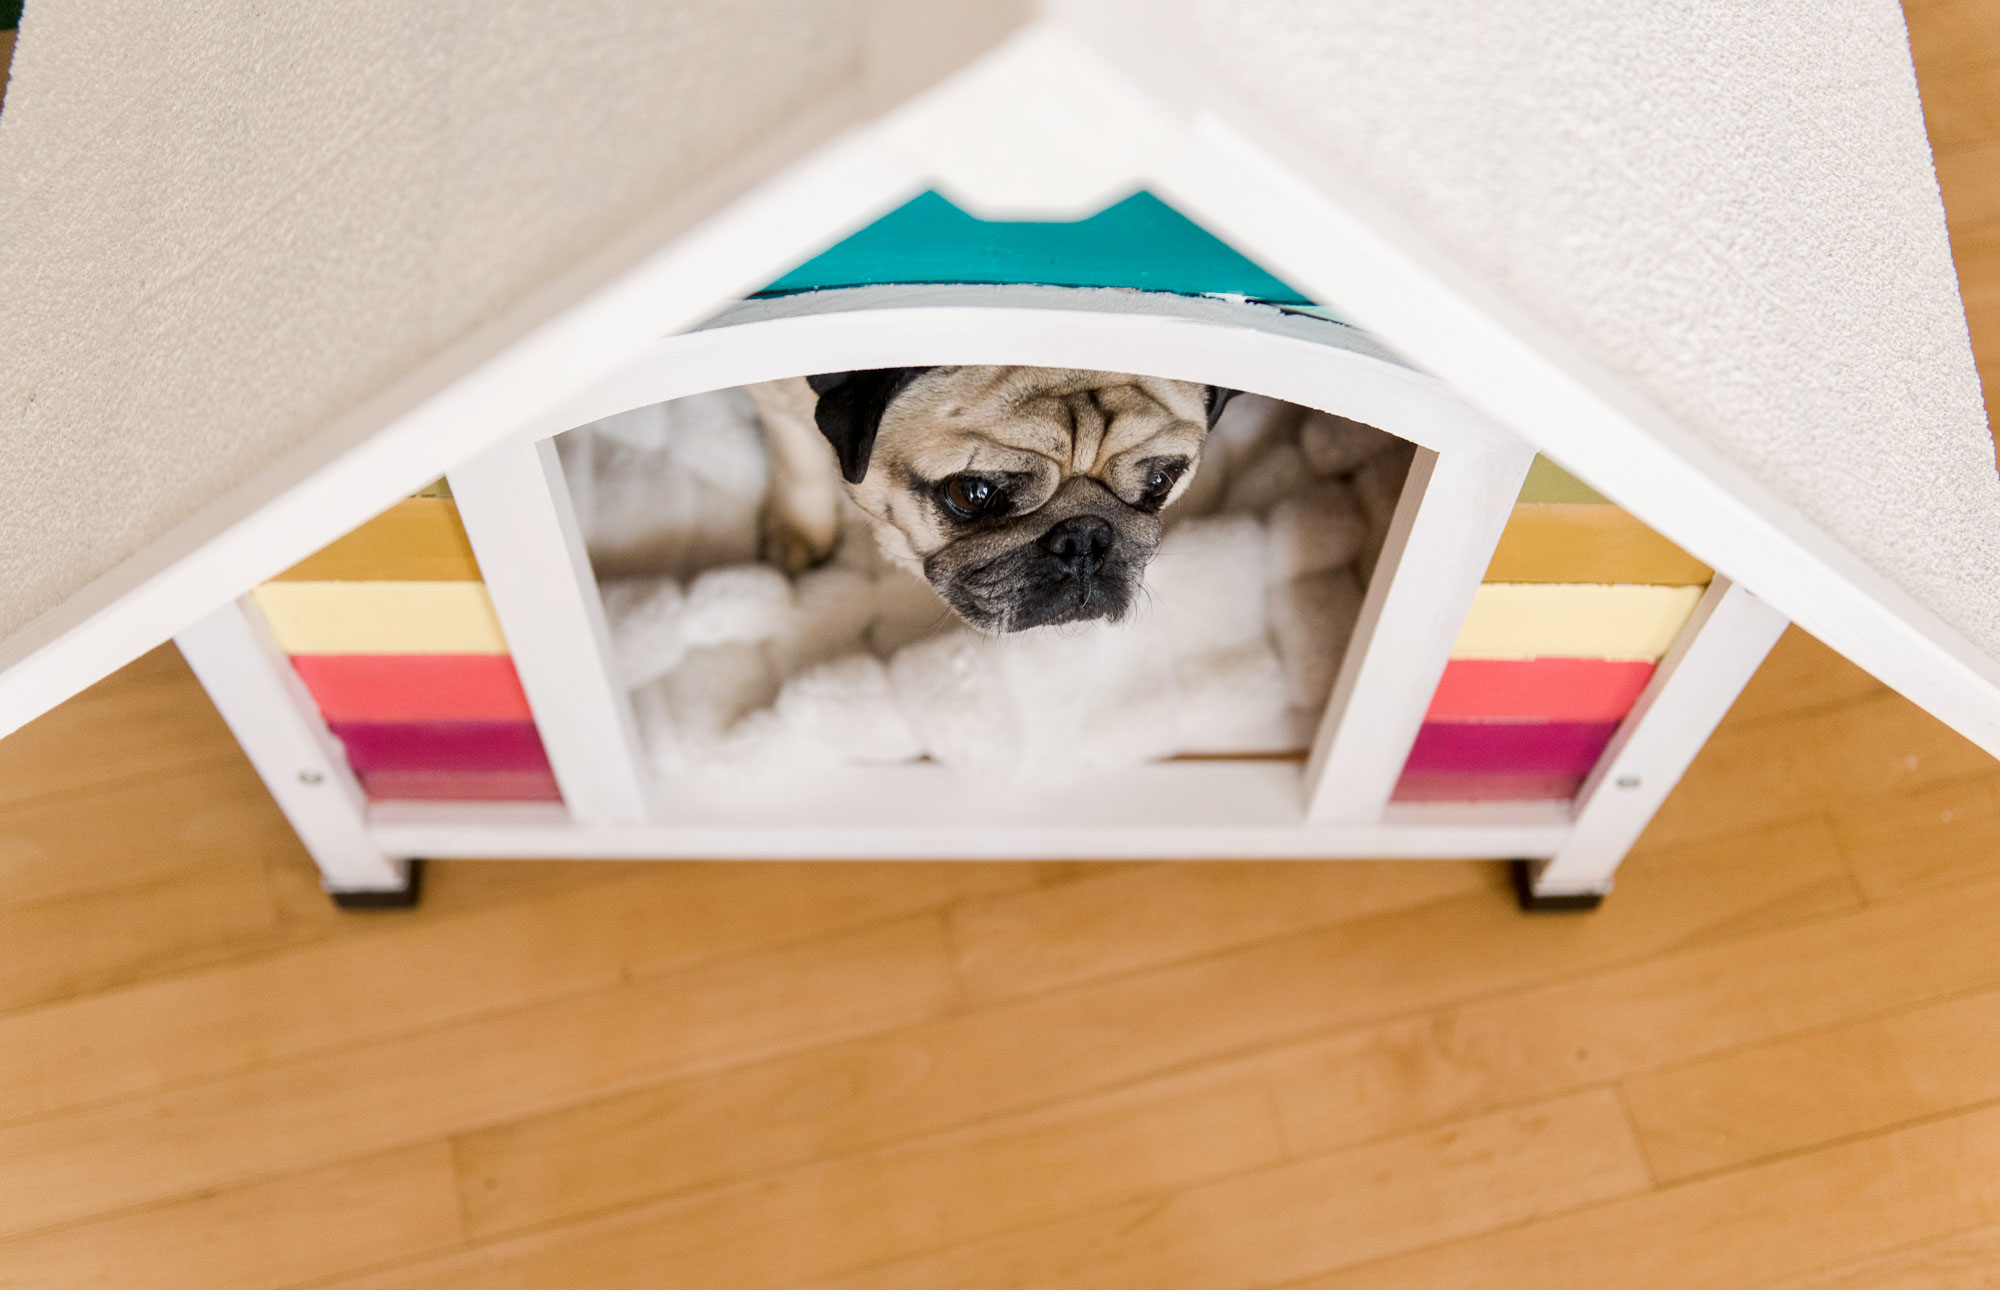 How to build a rainbow dog house, colorful doghouse DIY, painted doghouse, painted doghouse DIY, how to paint a doghouse, doghouse inspiration